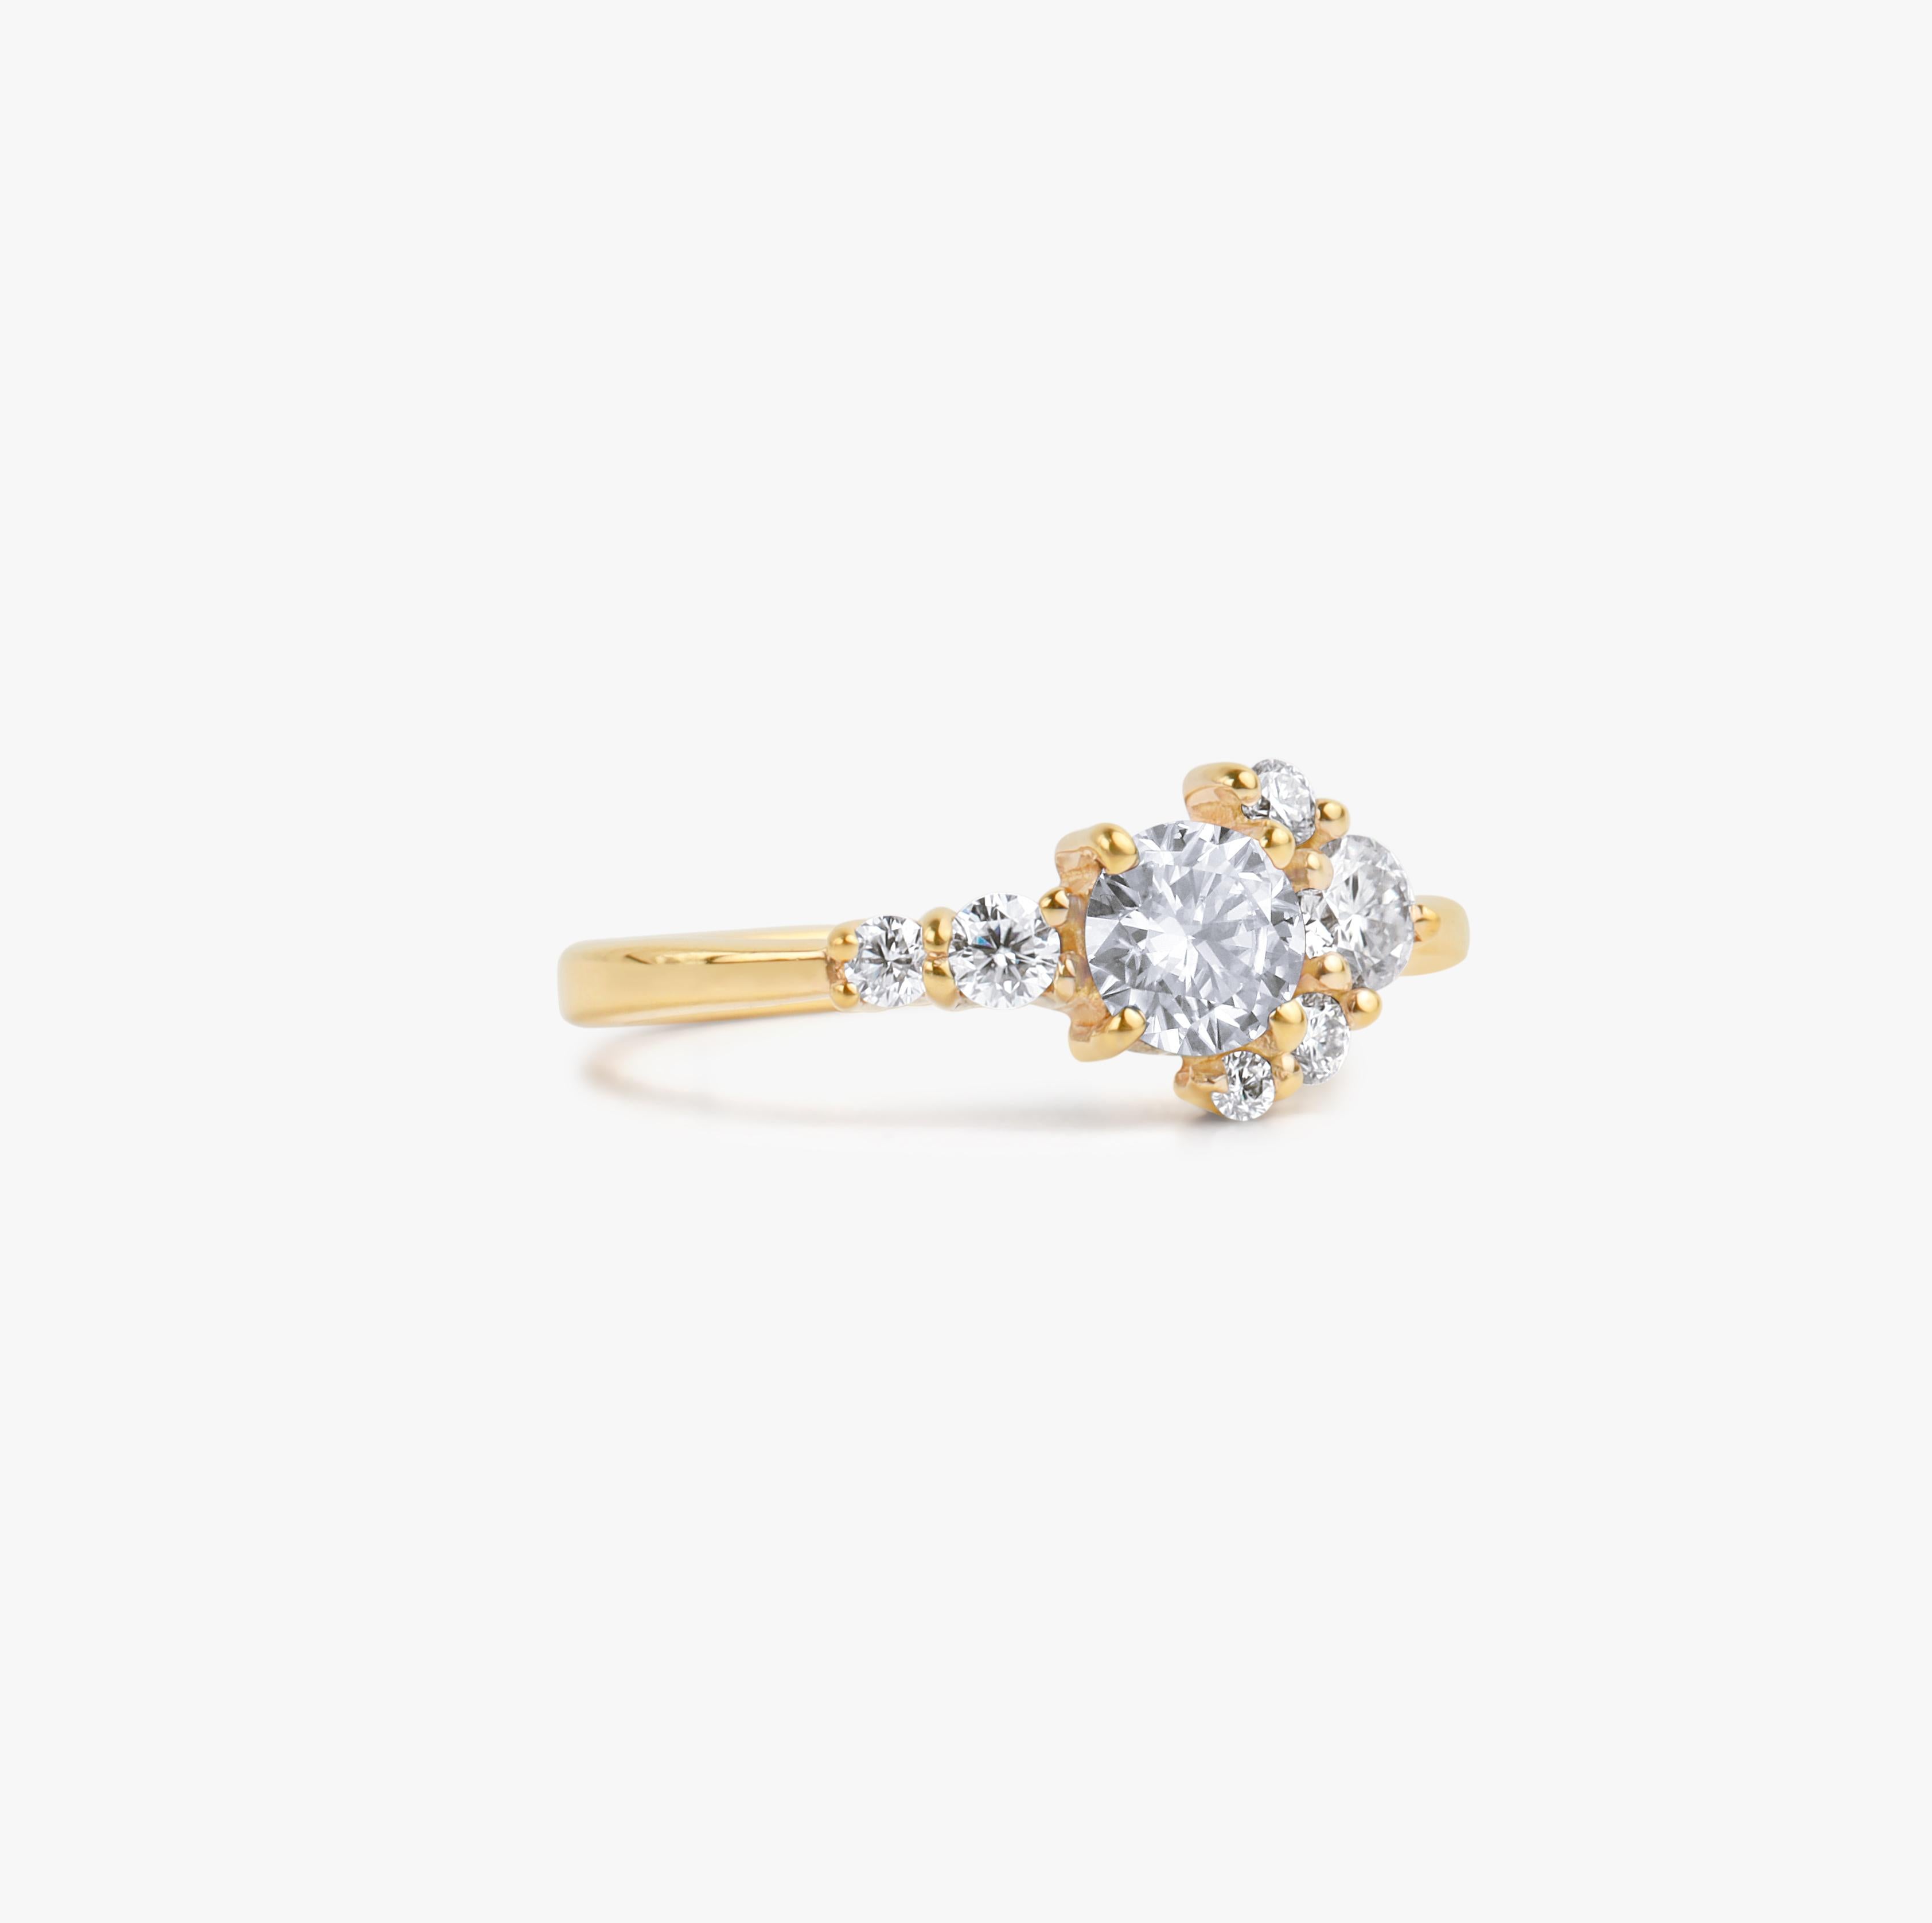 GIA Diamond Cluster Ring, Round Cut Engagement Ring, Statement Ring For Her

Available in 18k gold.

Same design can be made also with other custom gemstones per request.

Product details:

- Solid gold

- 5mm (0.5 carat) GIA certified diamond (